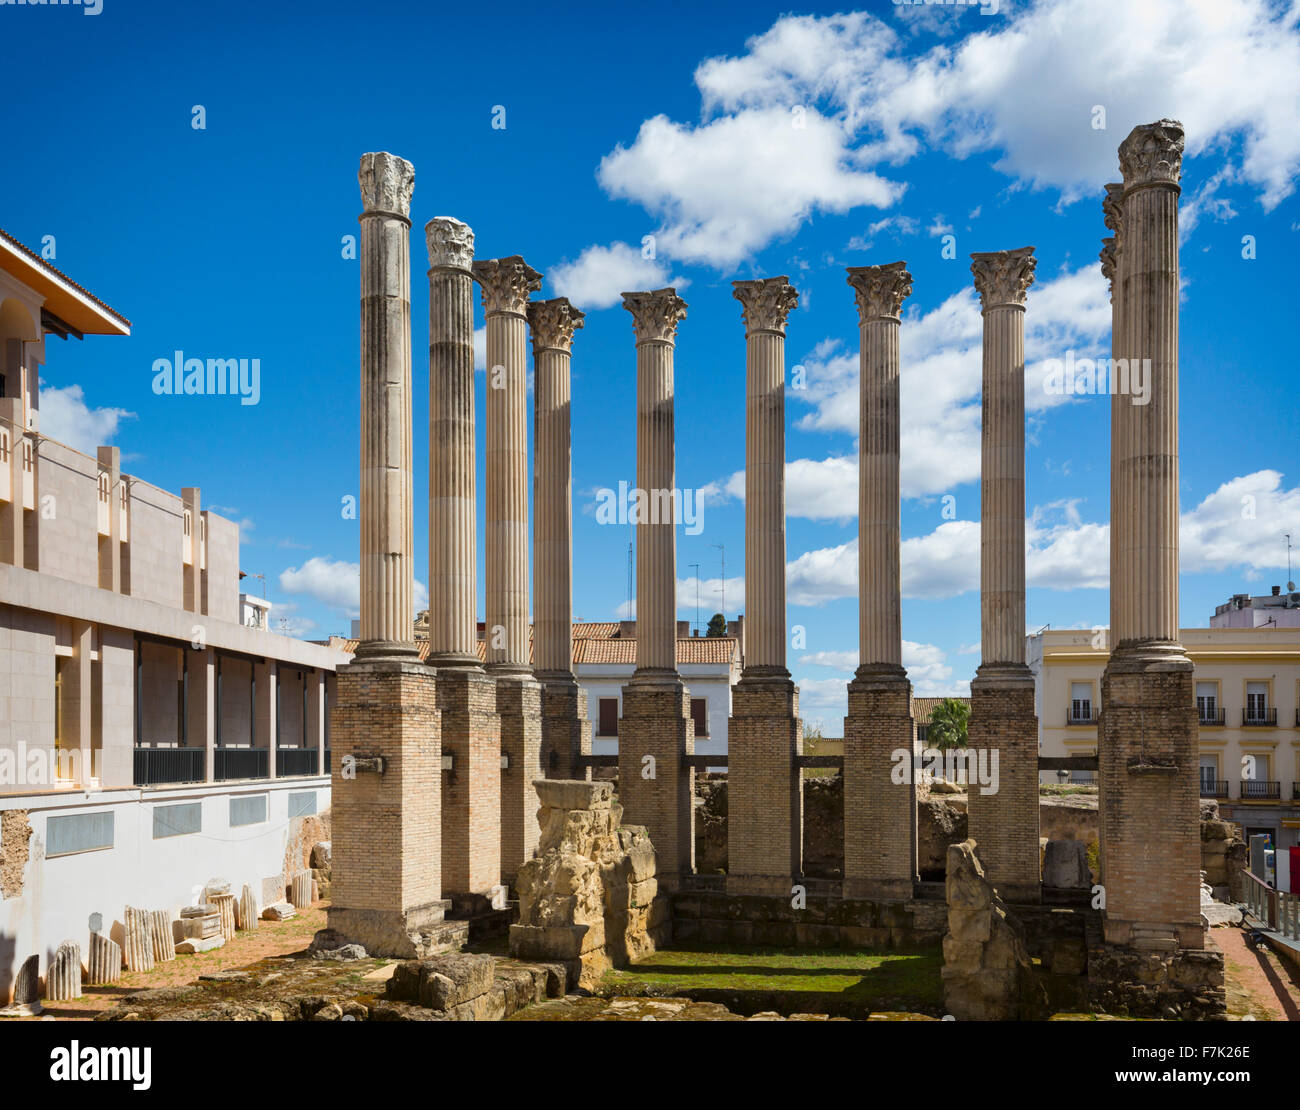 Cordoba, Cordoba Province, Andalusia, southern Spain.  Columns with Corinthian capitals of 1st century AD Roman temple. Stock Photo